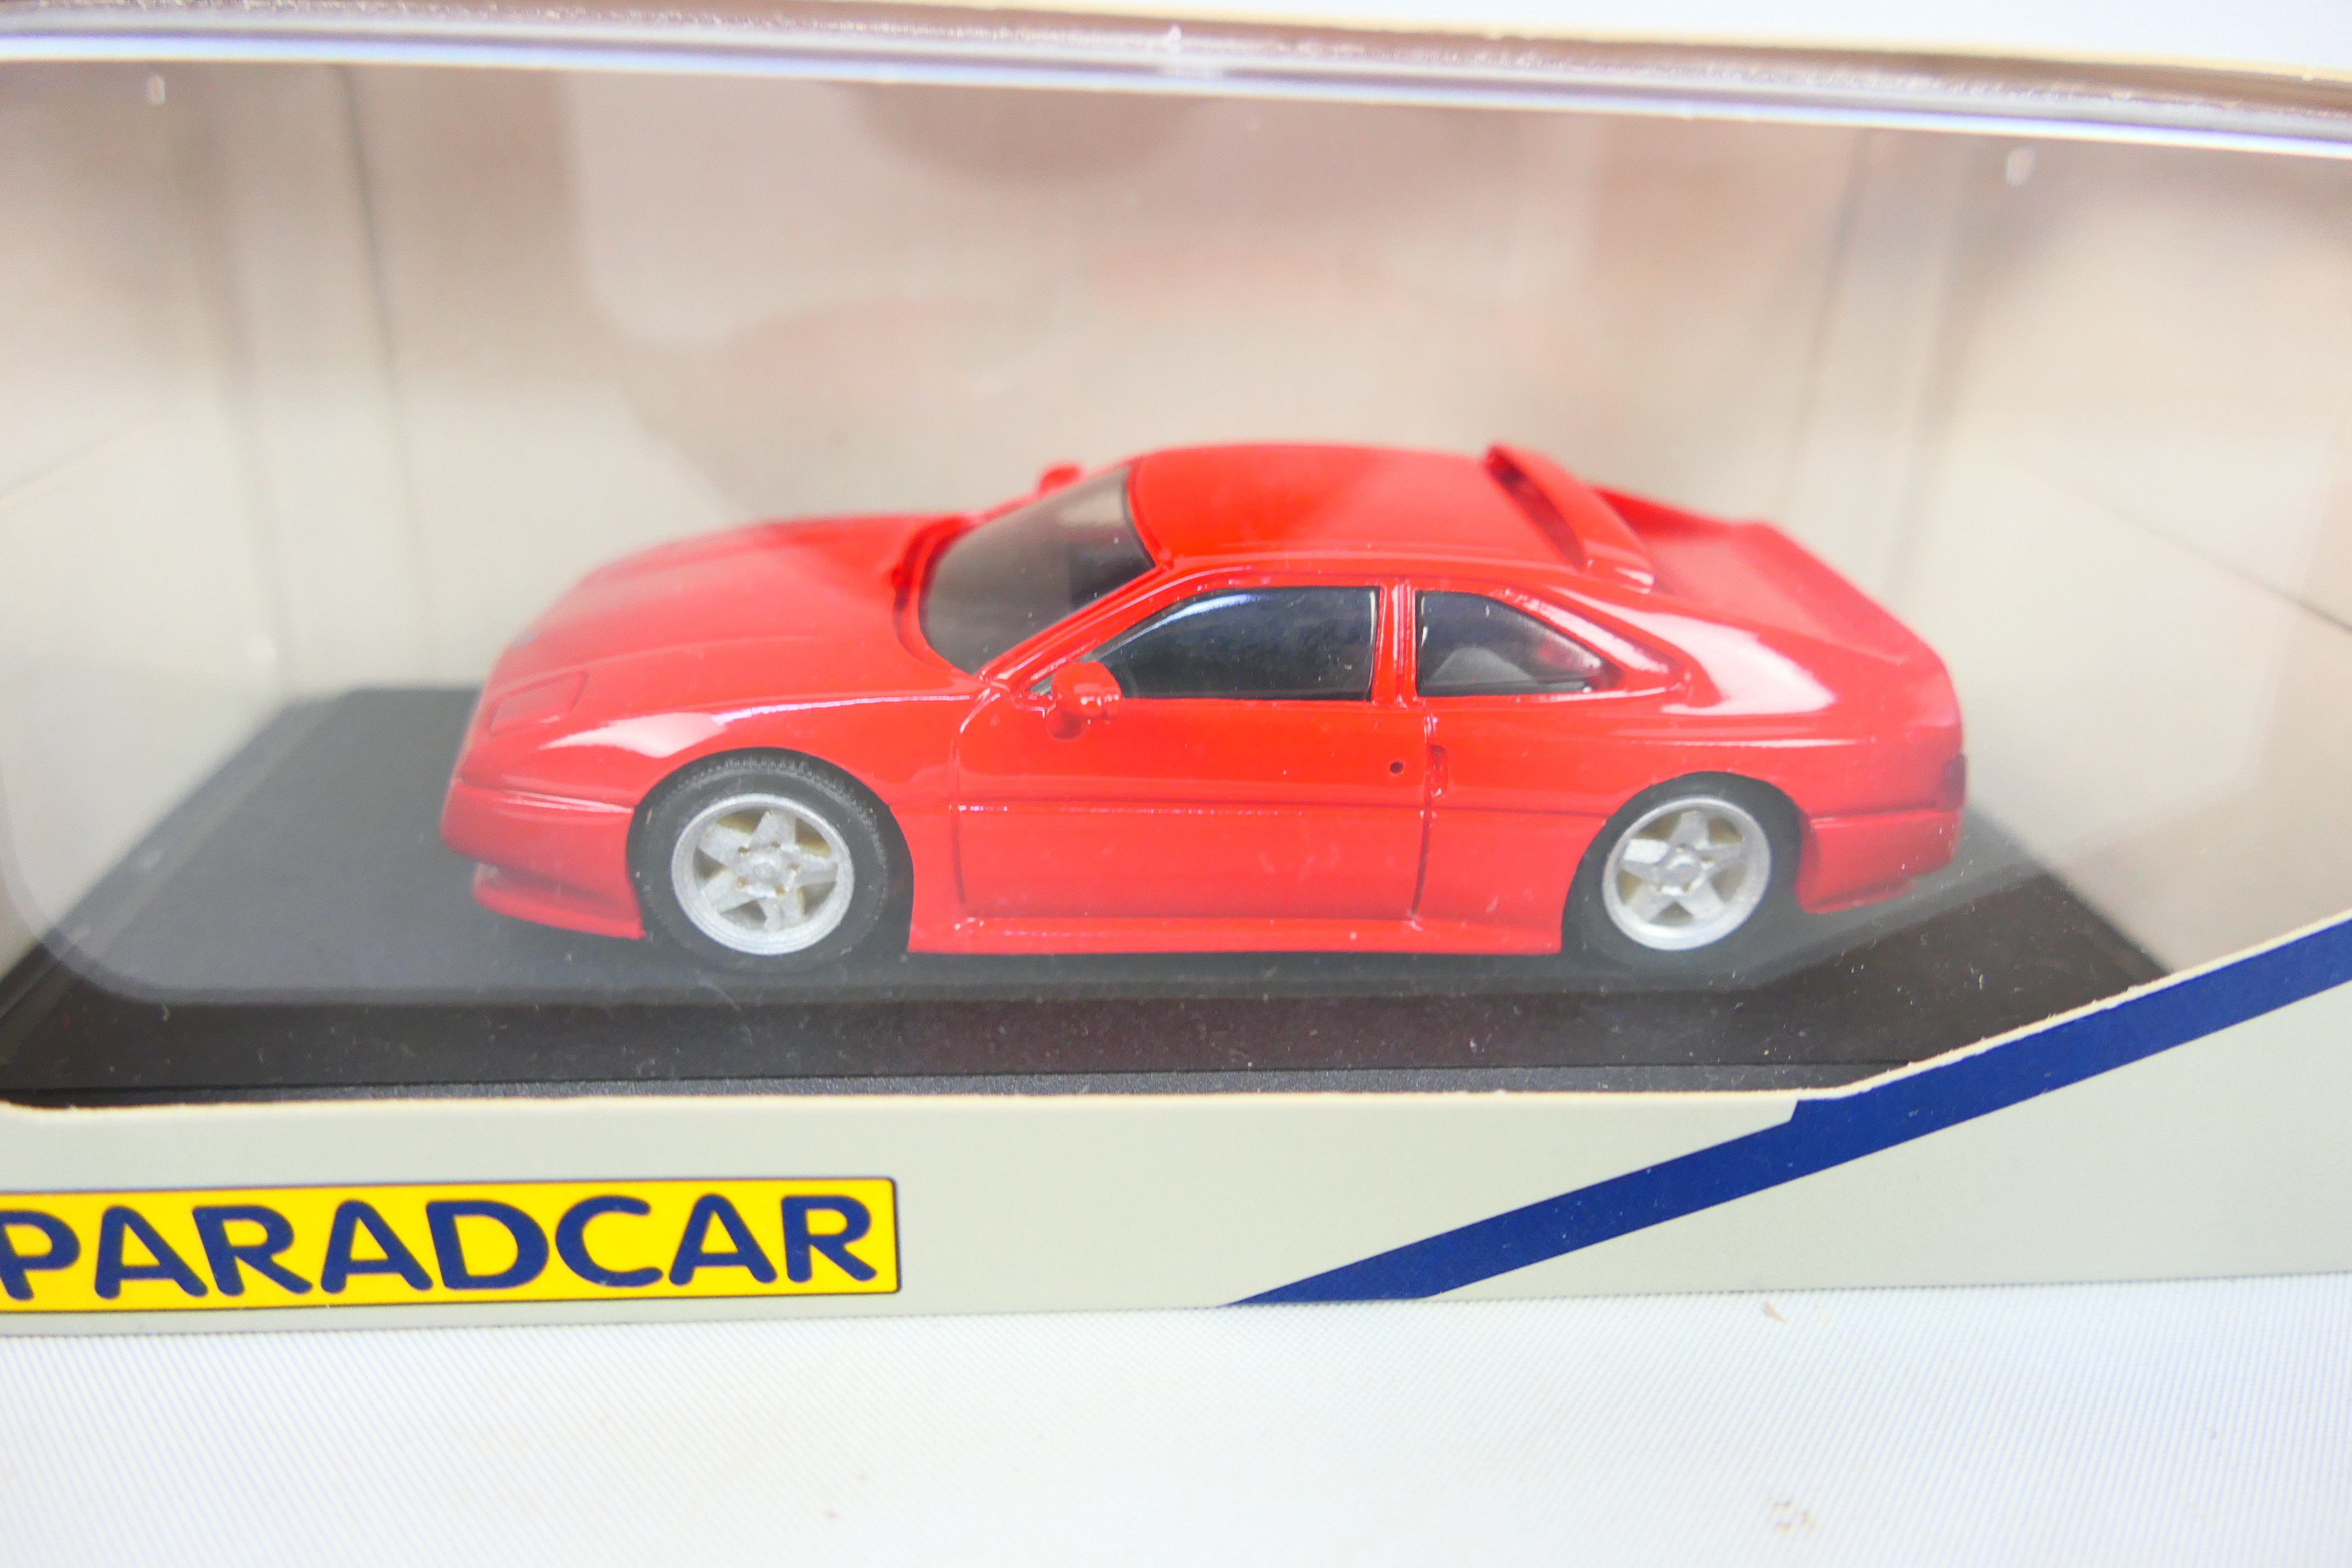 Paradcar - 2 x rare French Venturi models in 1:43 scale resin, - Image 3 of 10